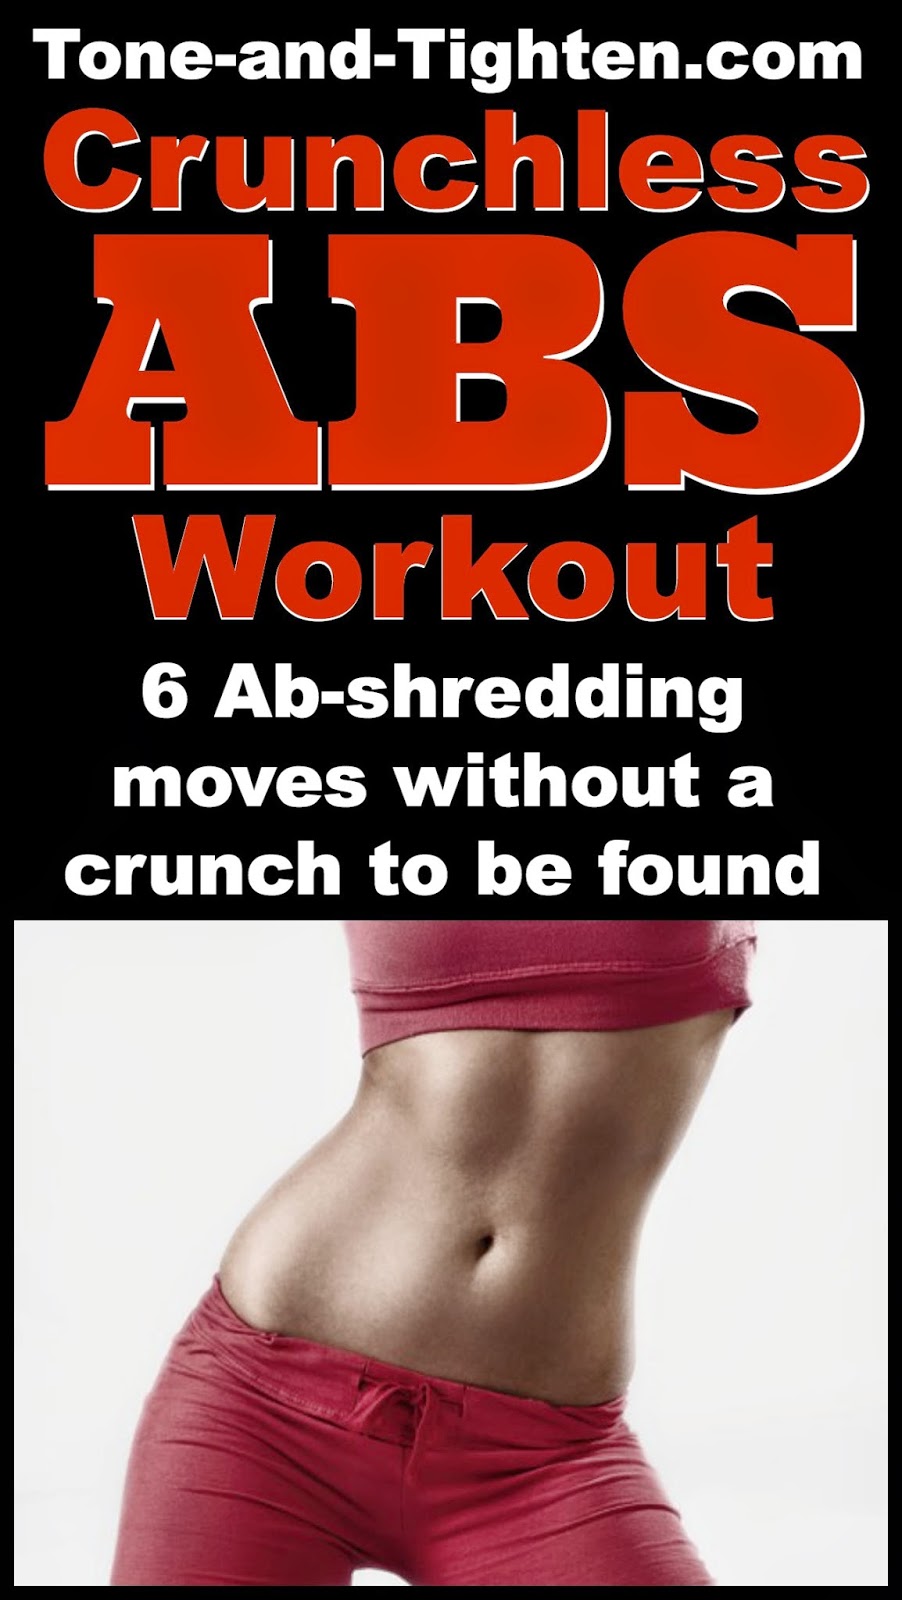 How do you work out the lower abs and love handles?